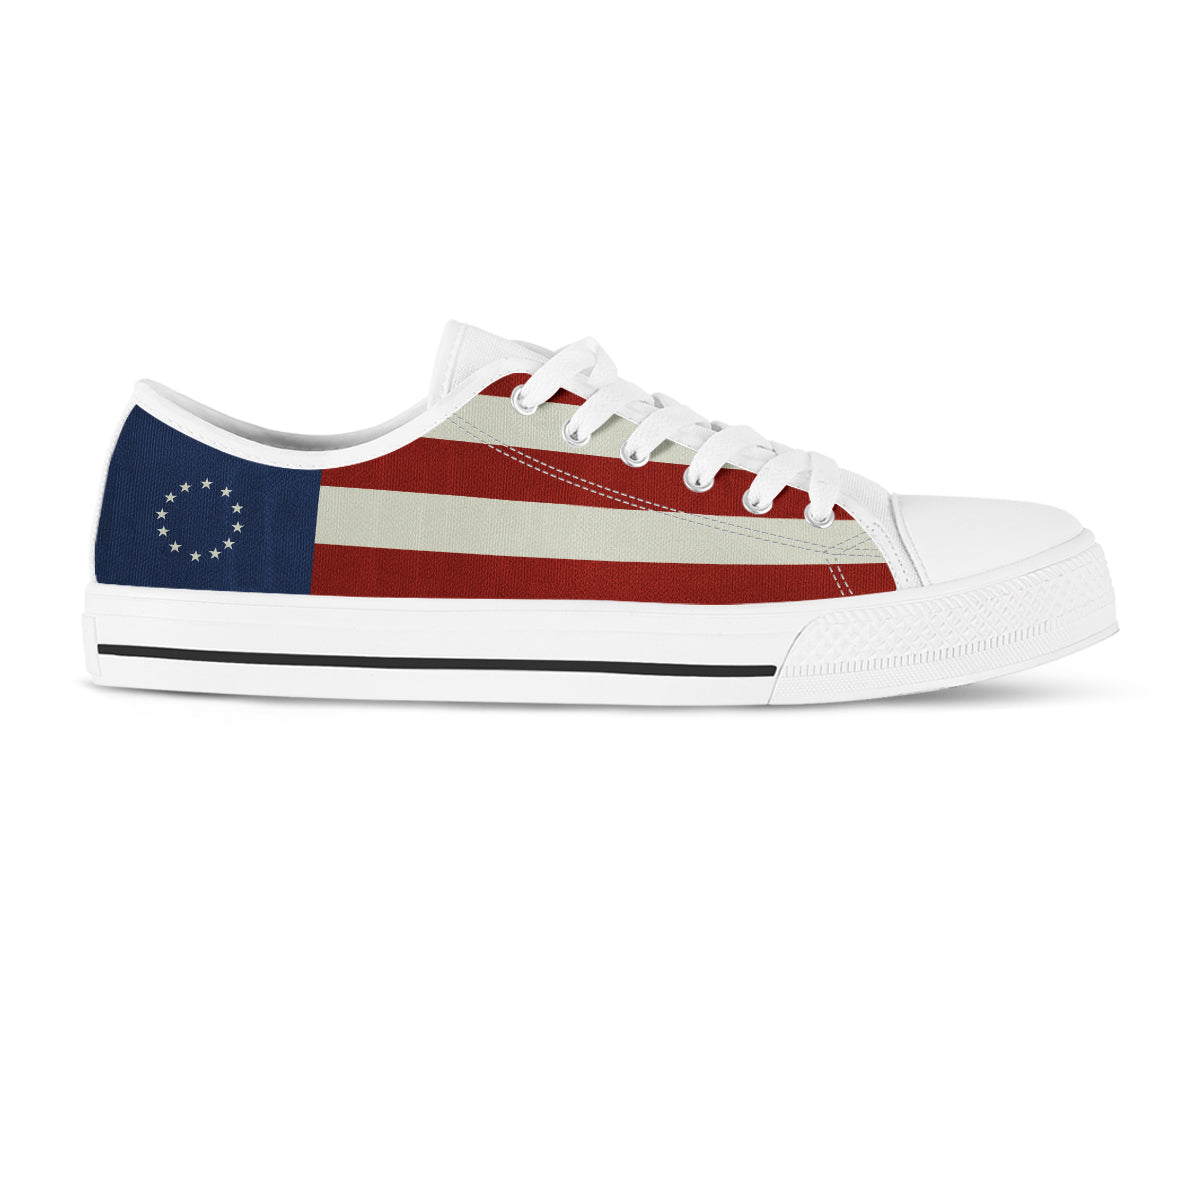 betsy ross tennis shoes